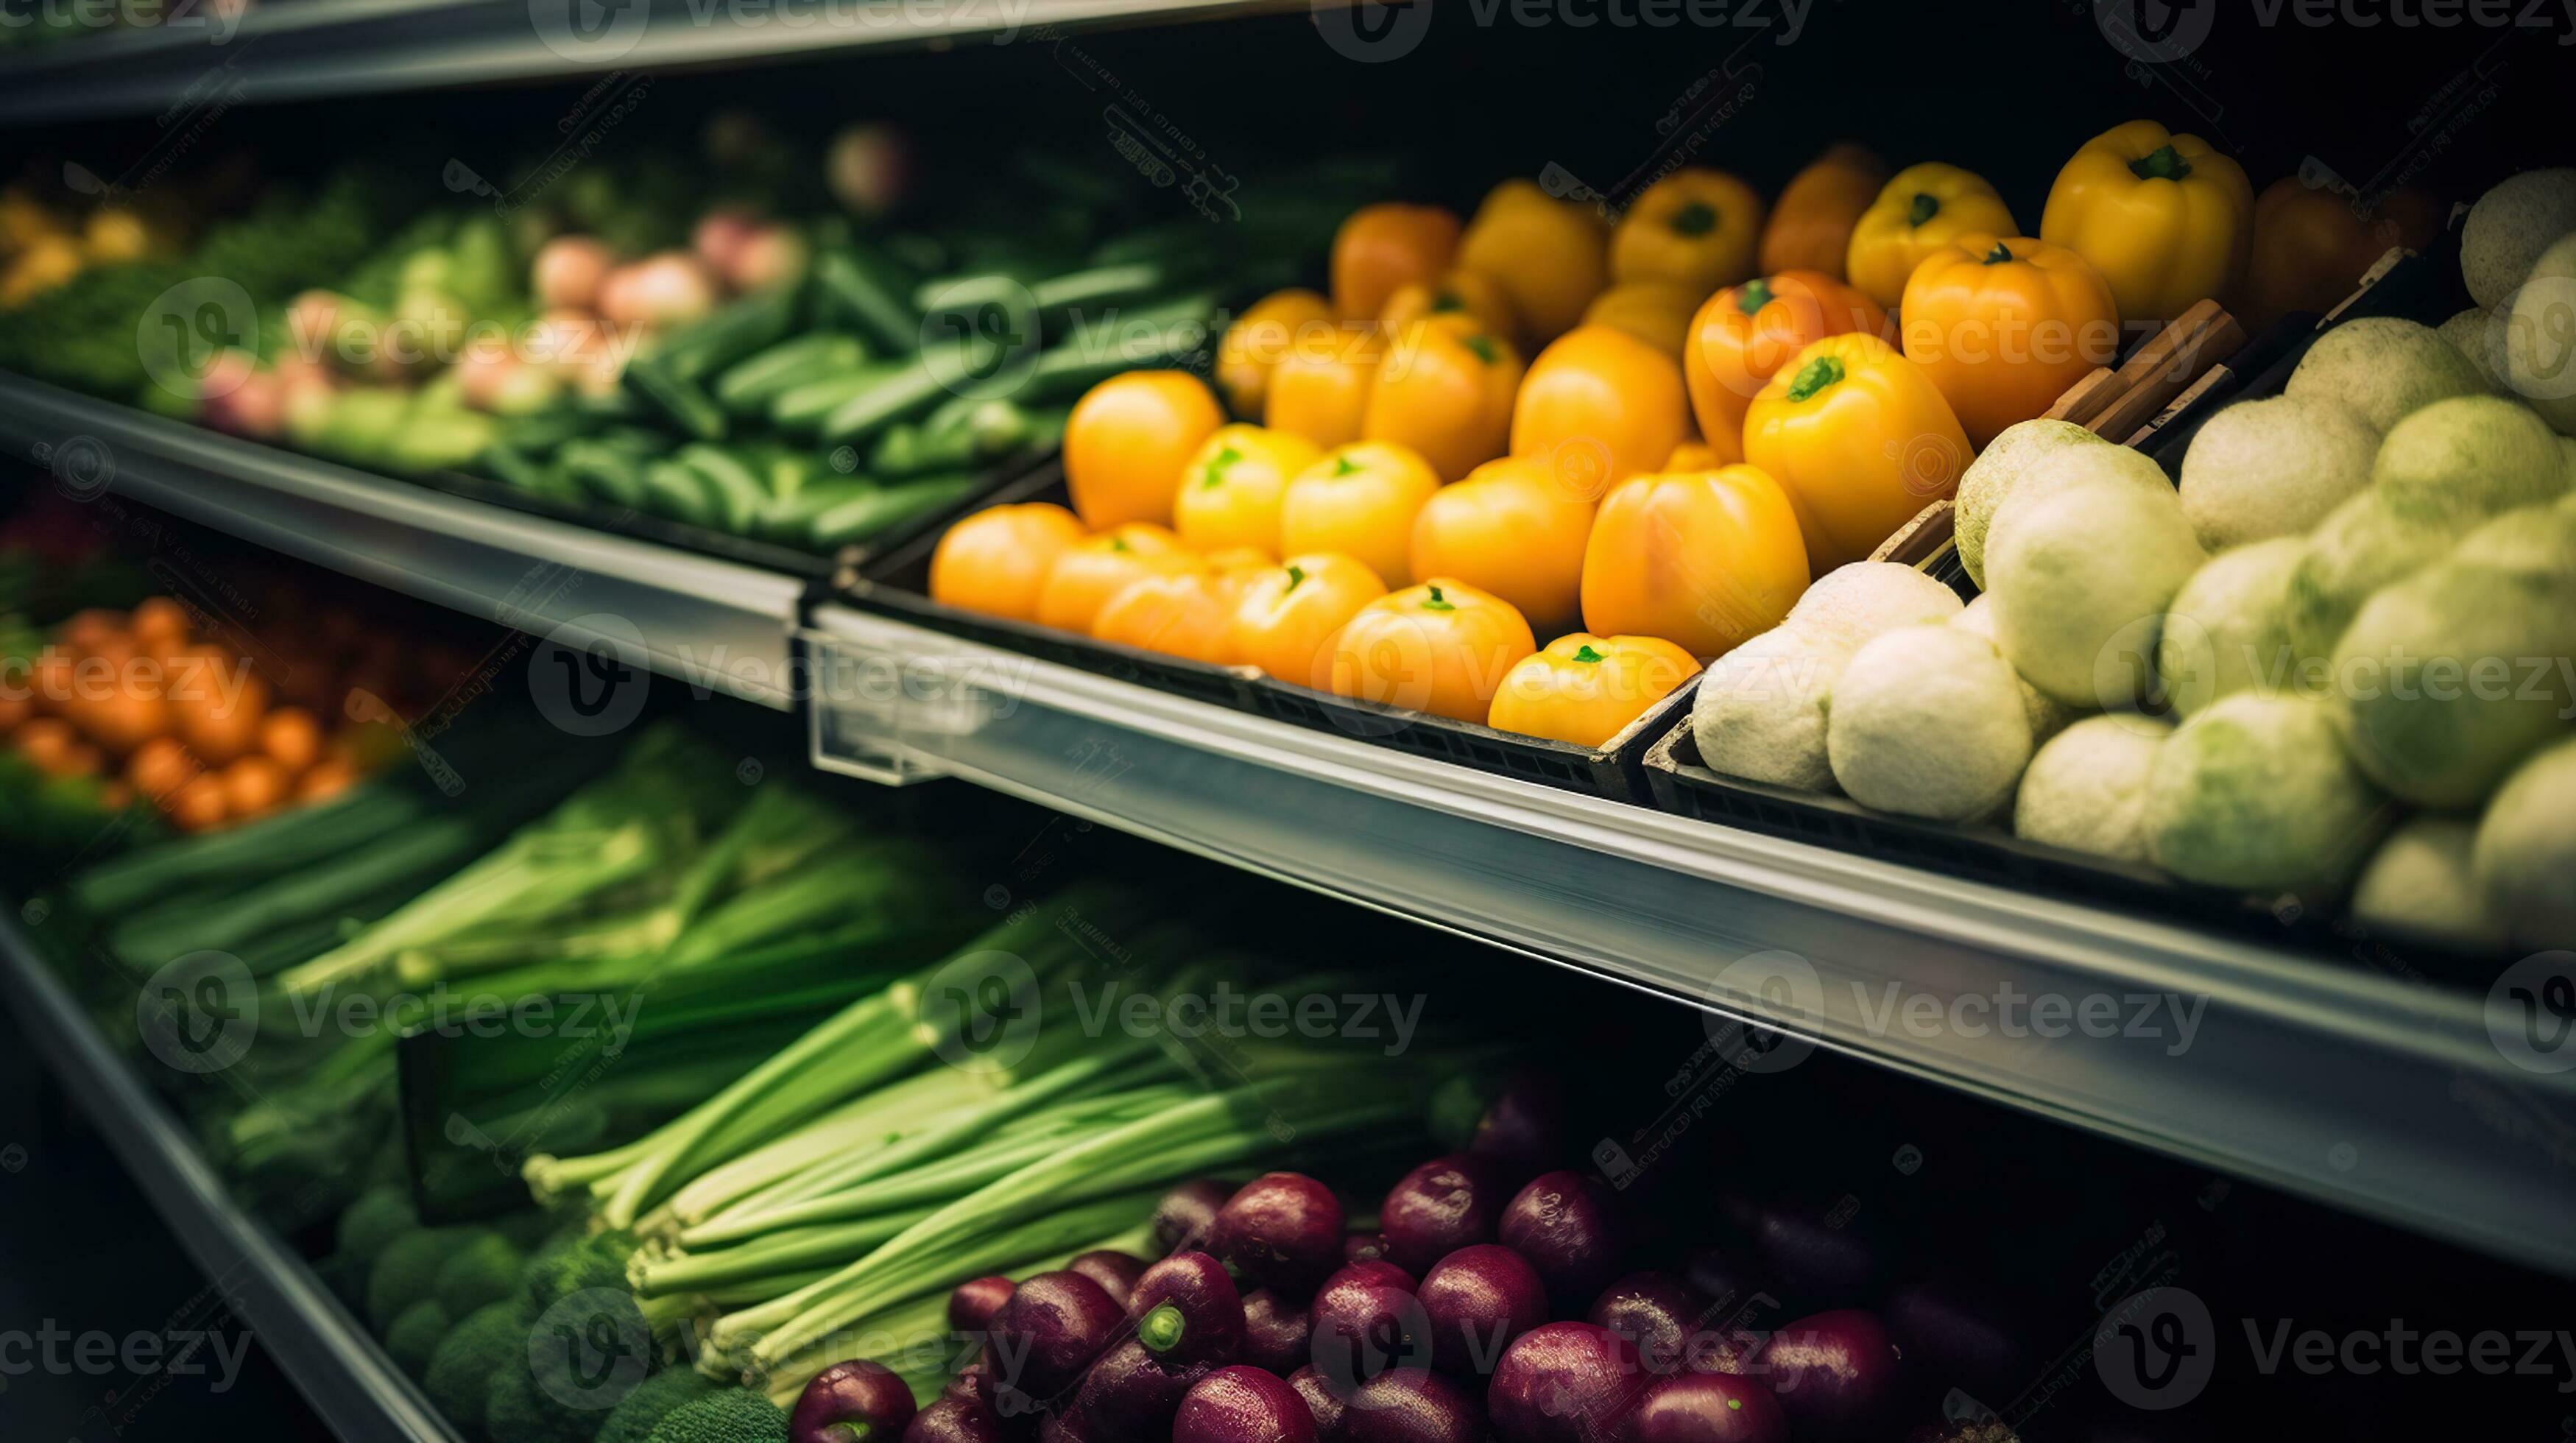 https://static.vecteezy.com/system/resources/previews/029/625/715/large_2x/abundance-of-fresh-fruits-and-vegetables-in-supermarket-displays-generative-ai-photo.jpg